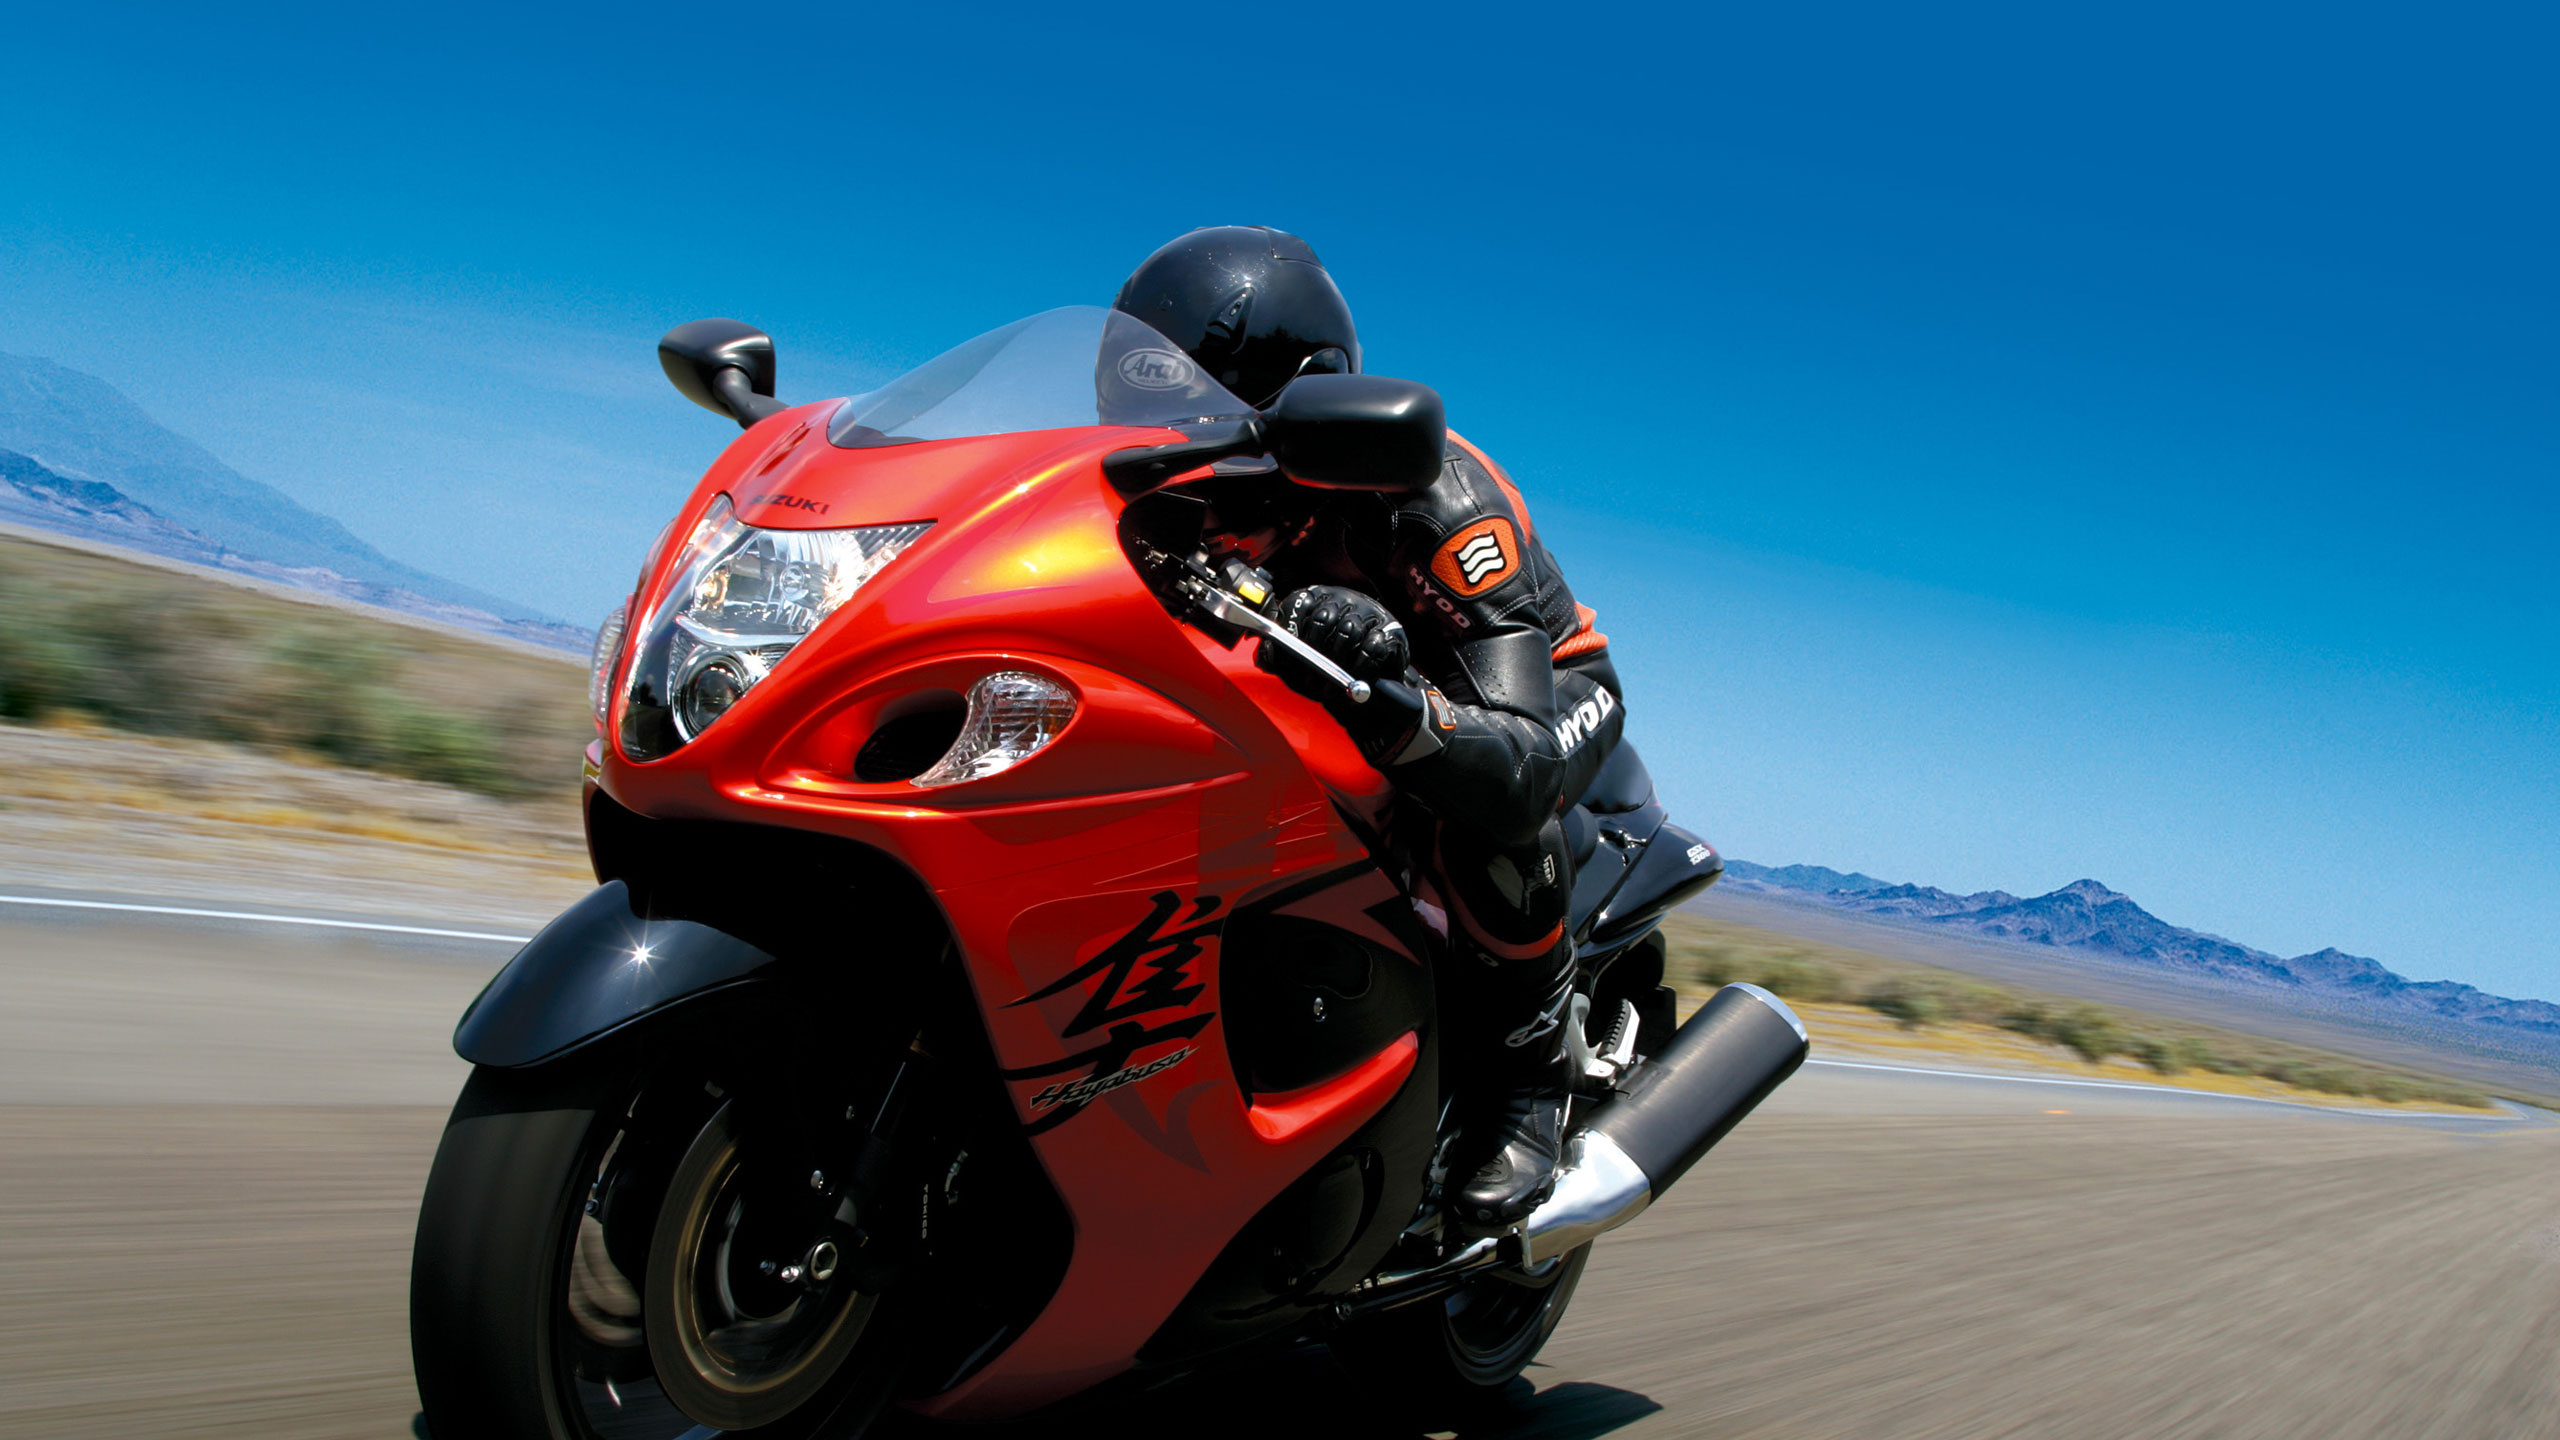 Red and Black Sports Bike on Road During Daytime. Wallpaper in 2560x1440 Resolution